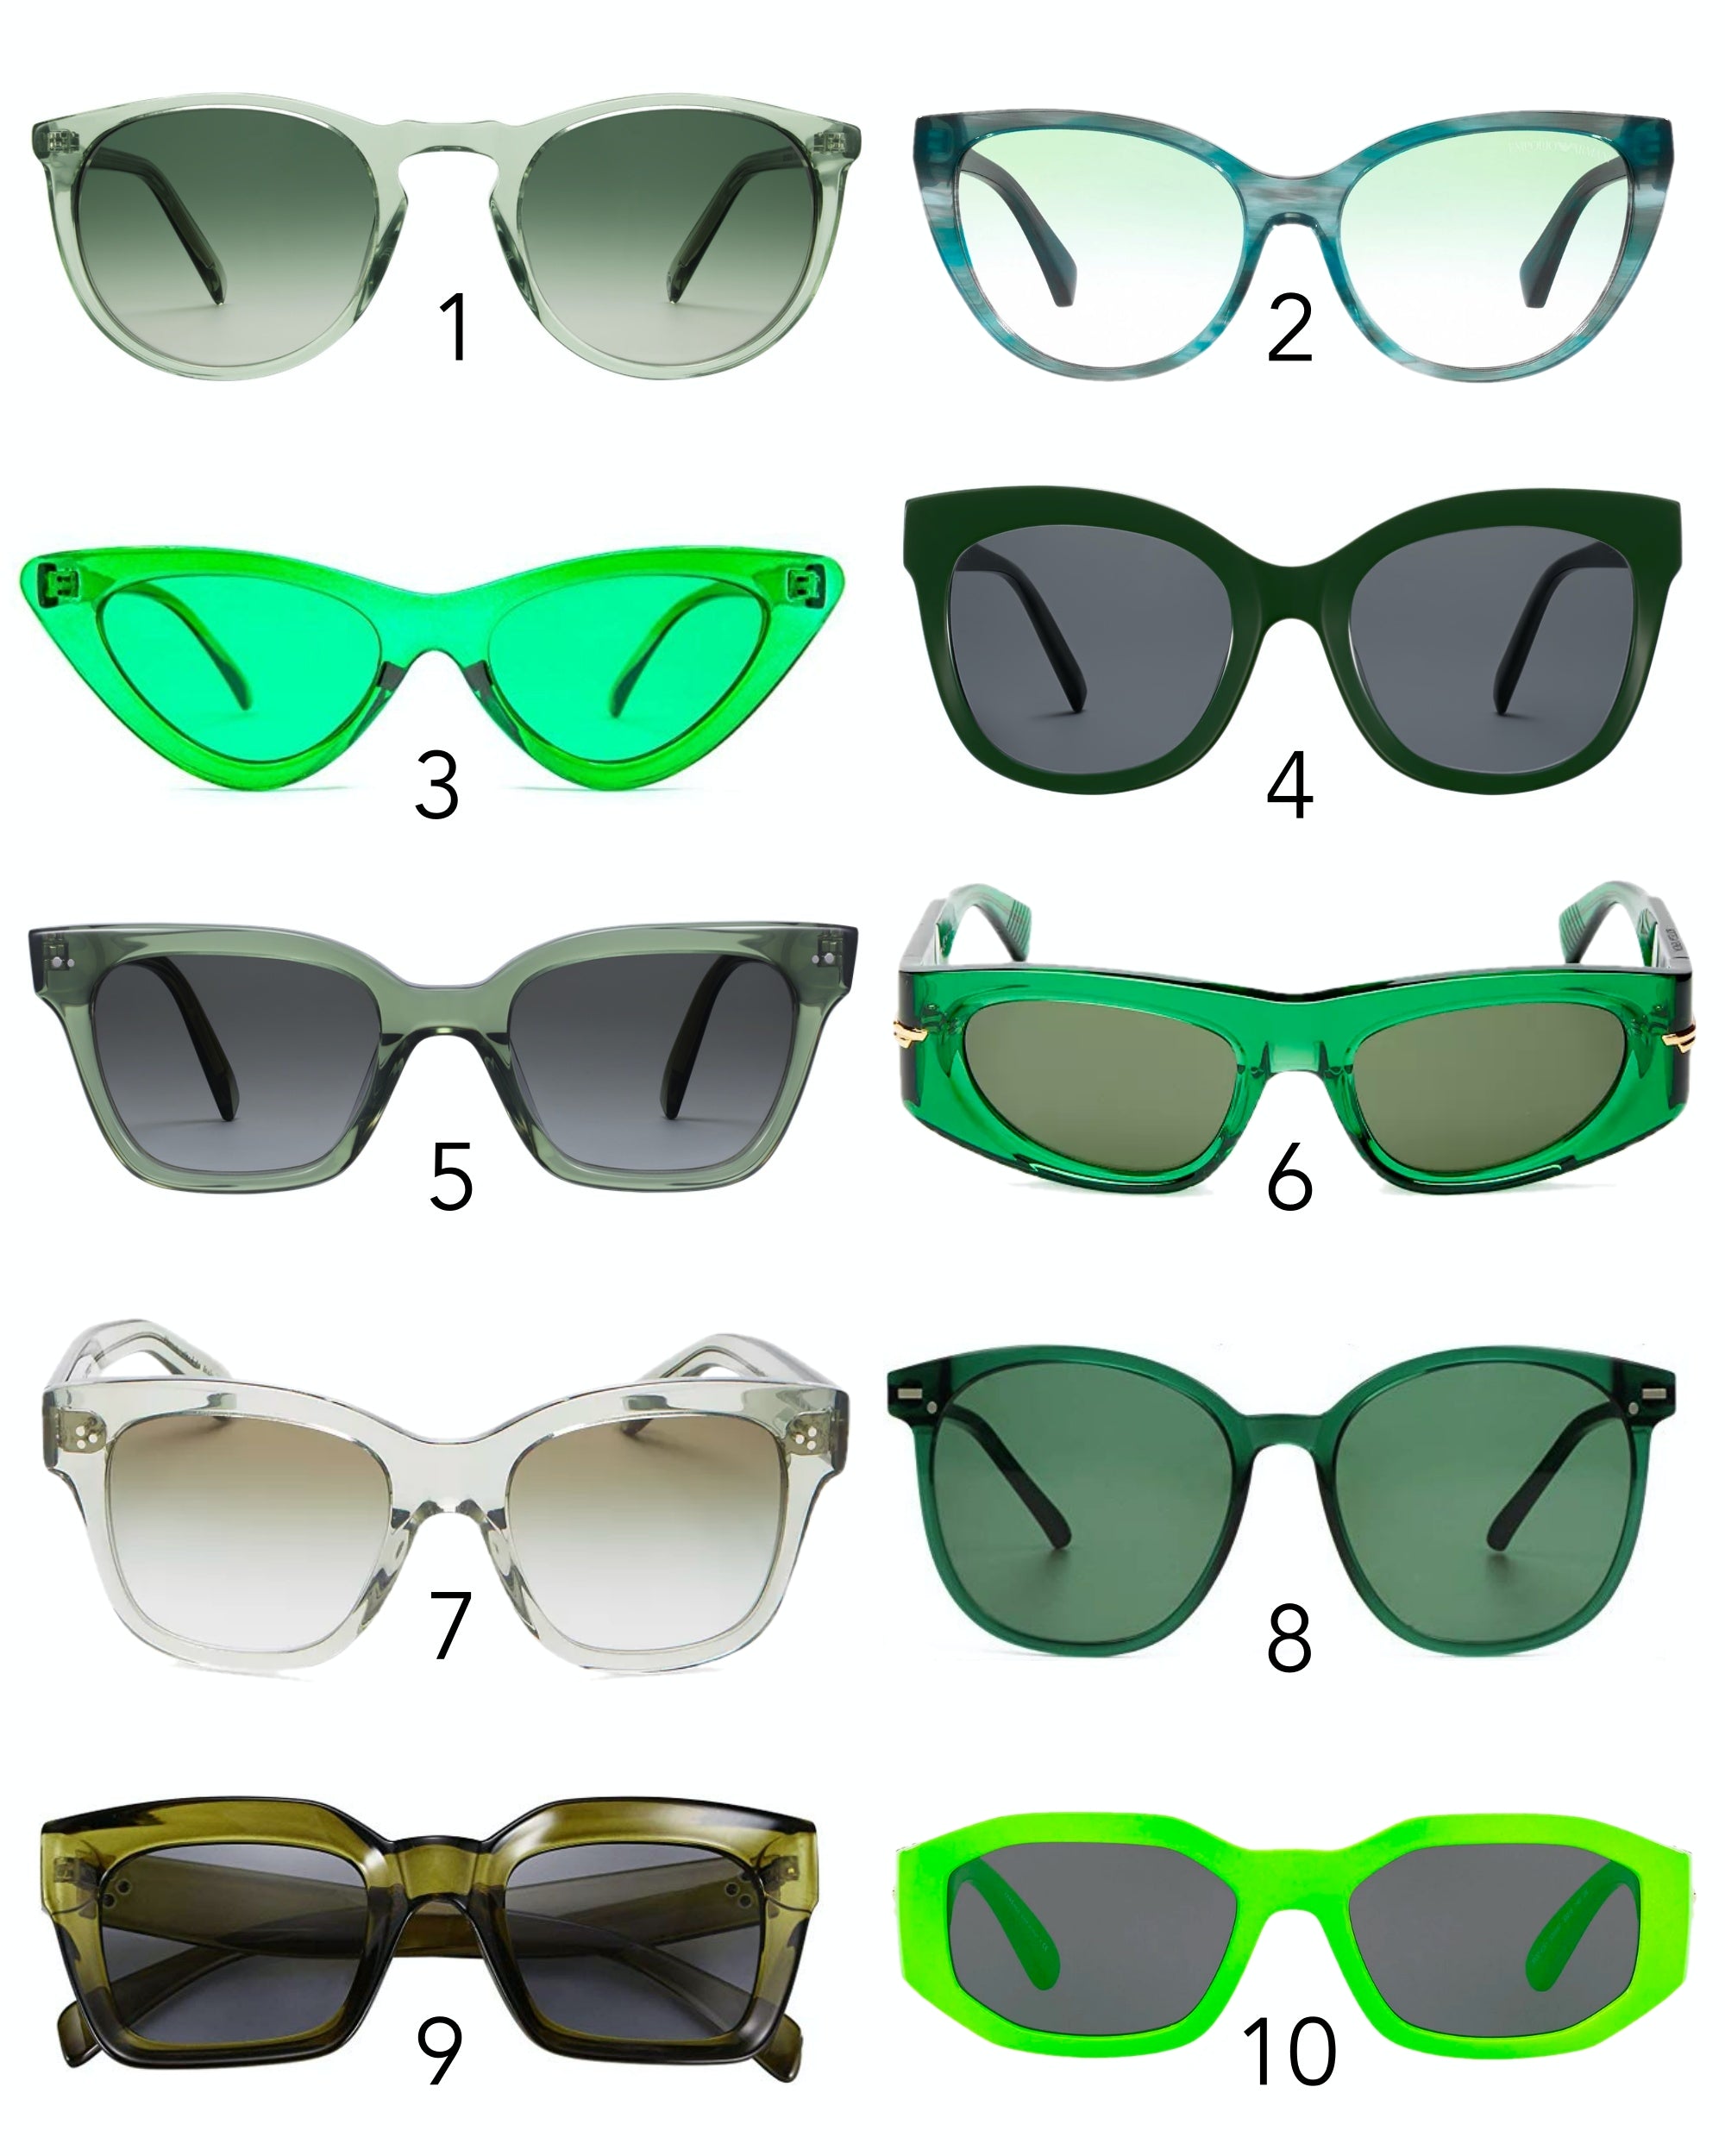 Shades of Green Product Board